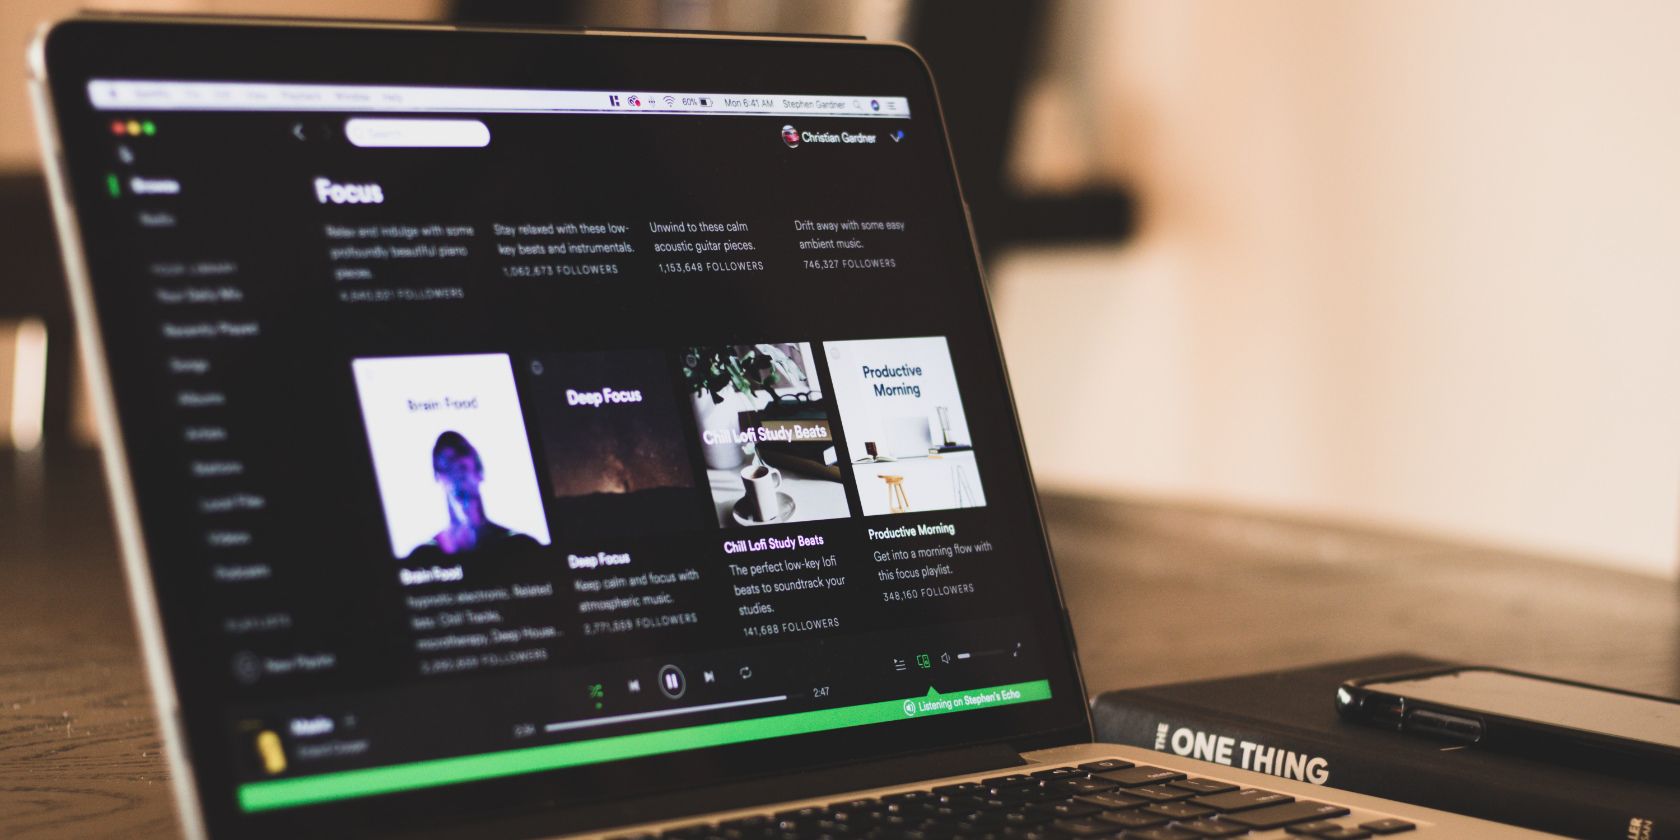 how to download spotify songs to computer